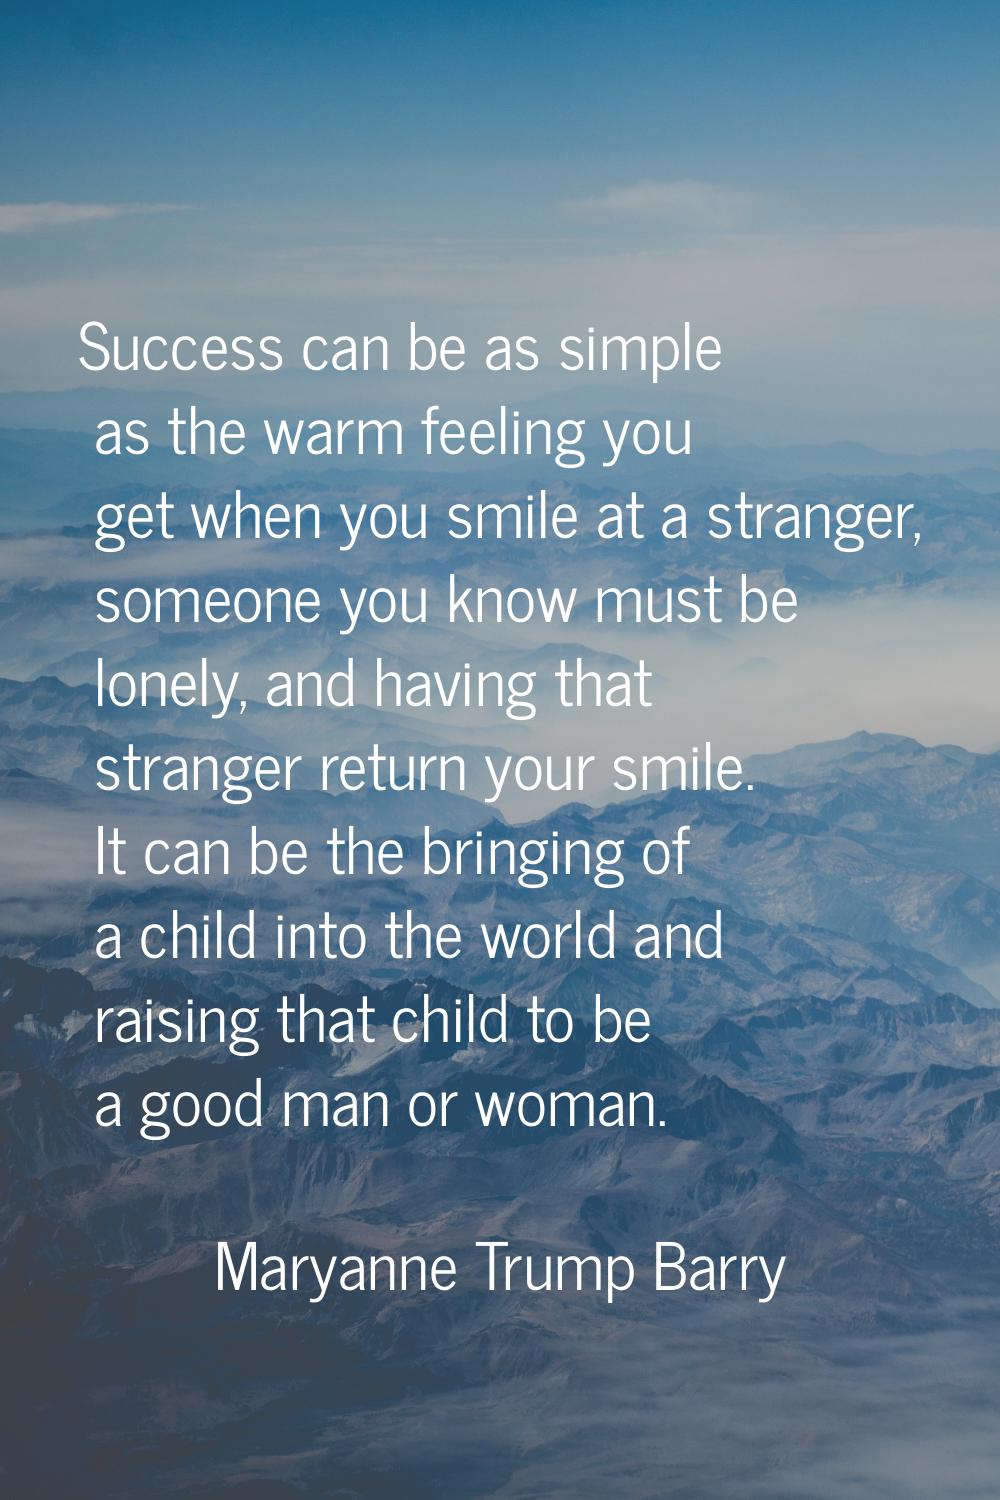 Success can be as simple as the warm feeling you get when you smile at a stranger, someone you know